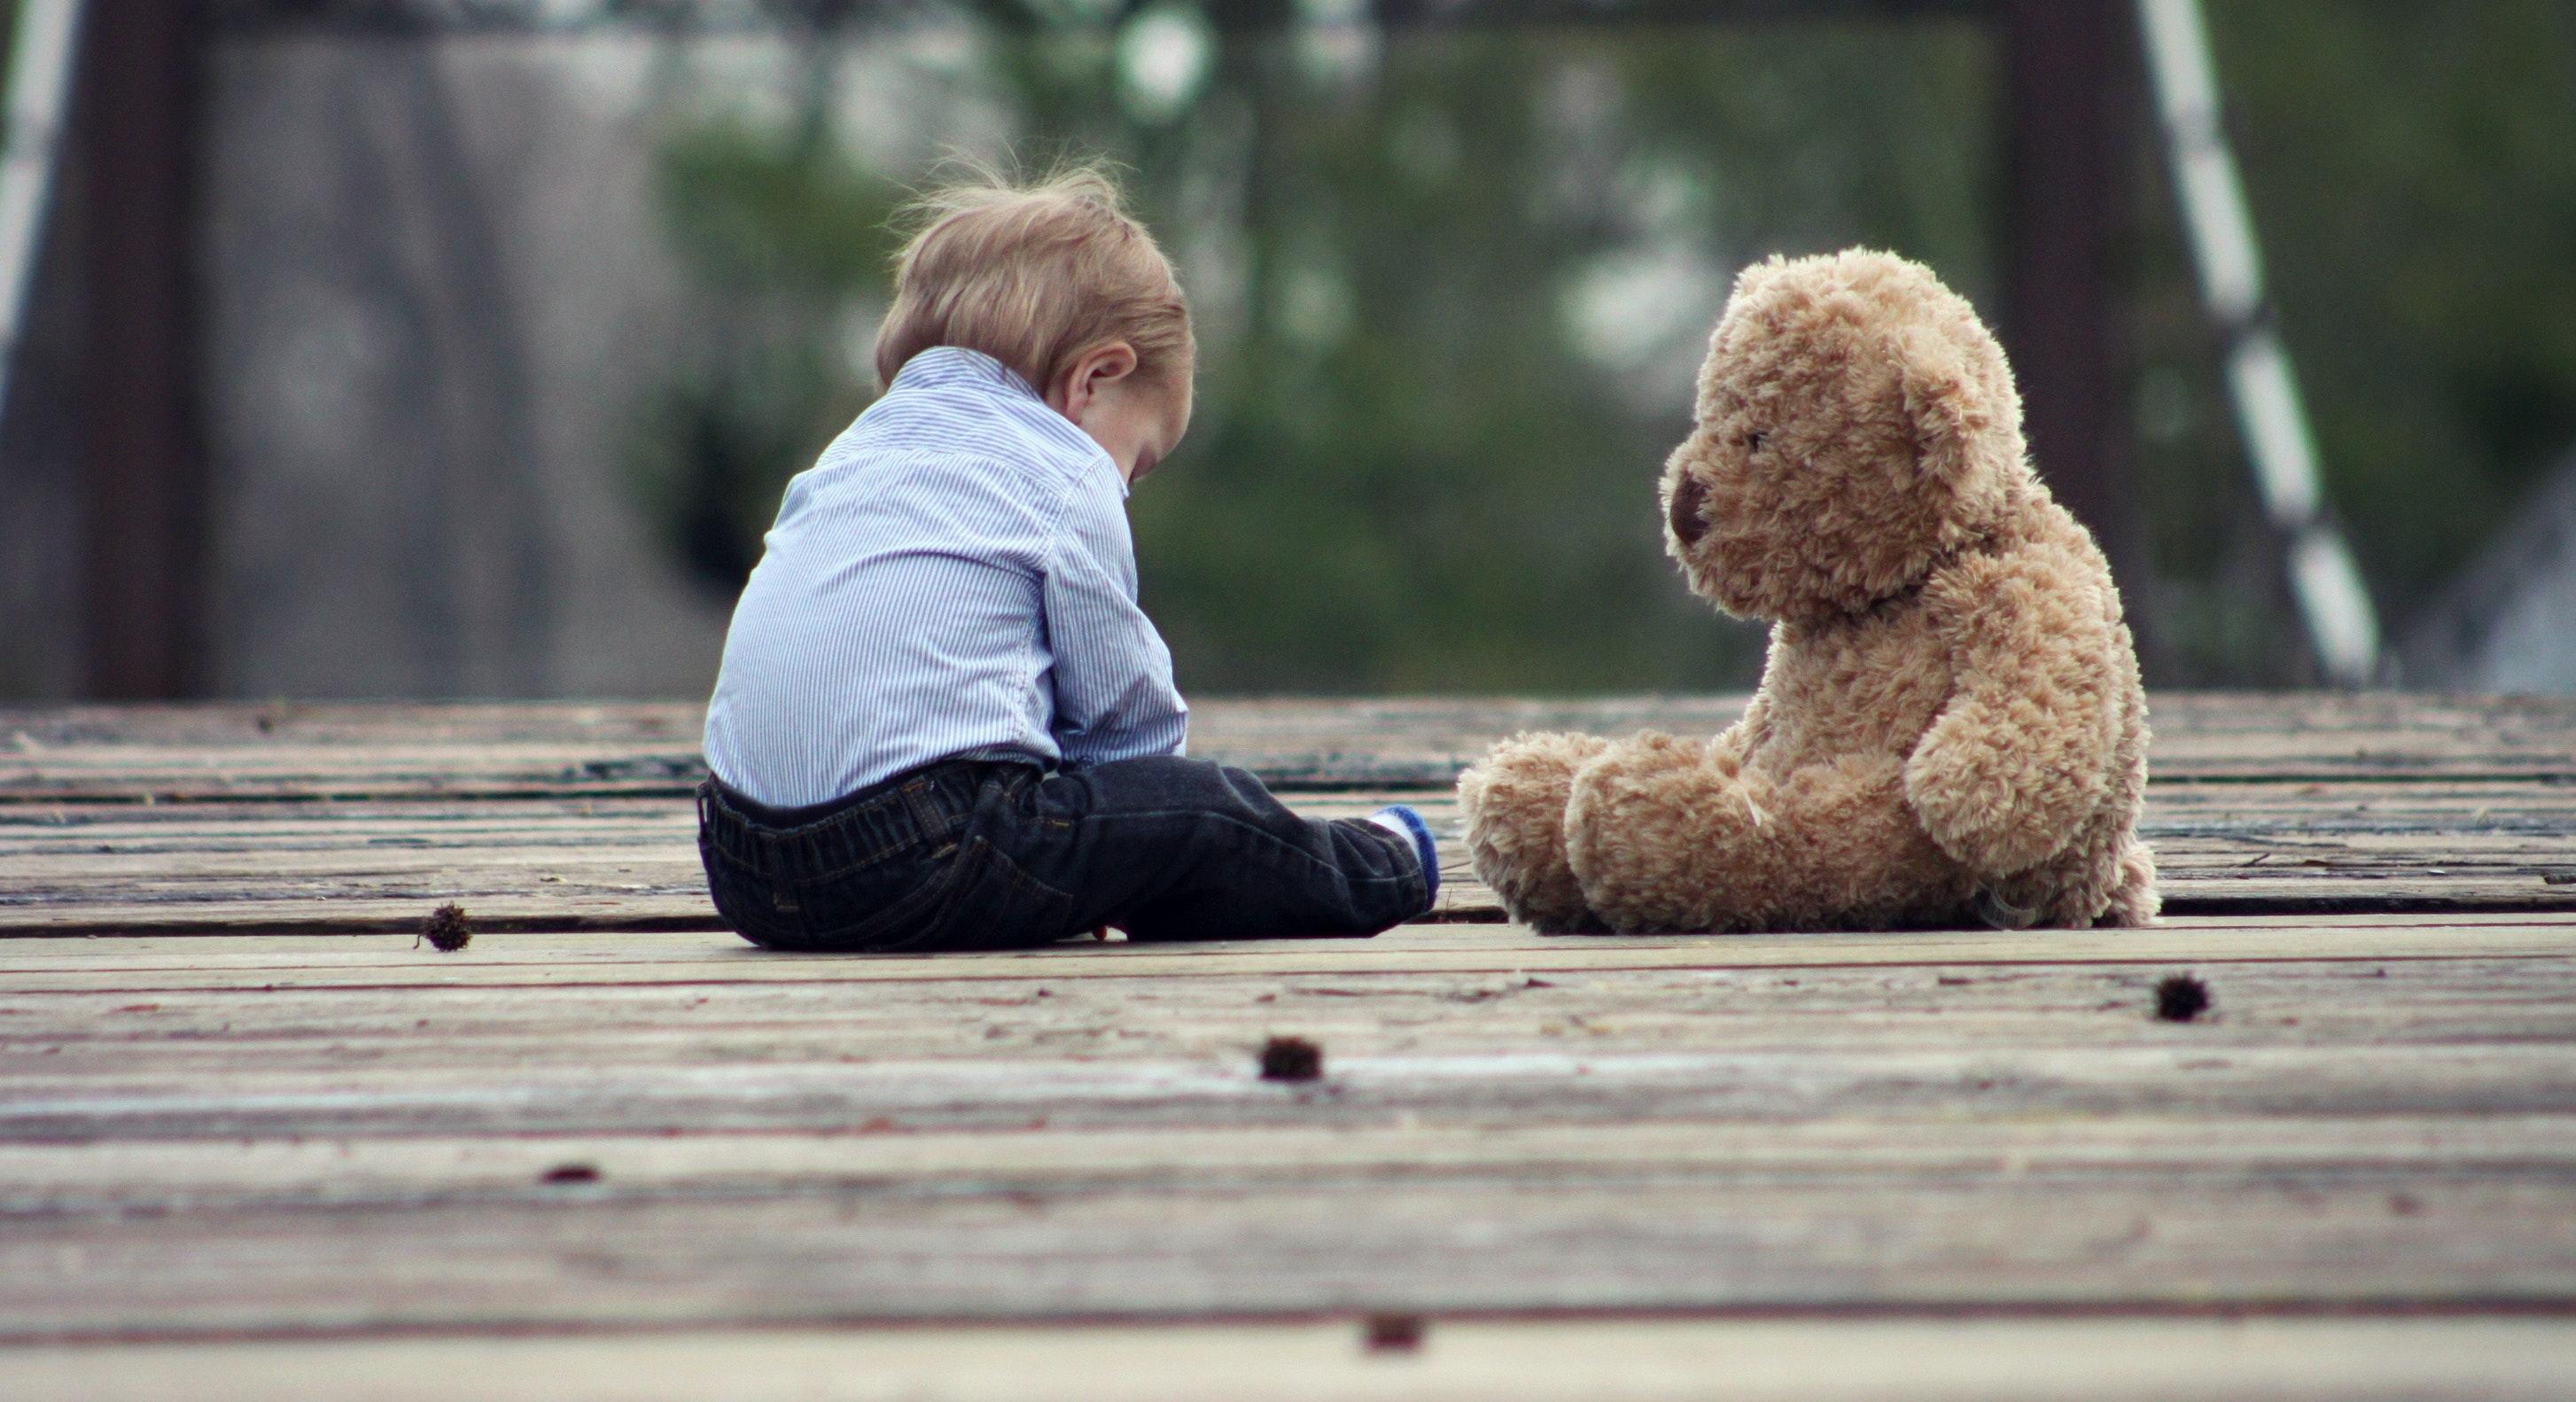 Toddler with teddy bear